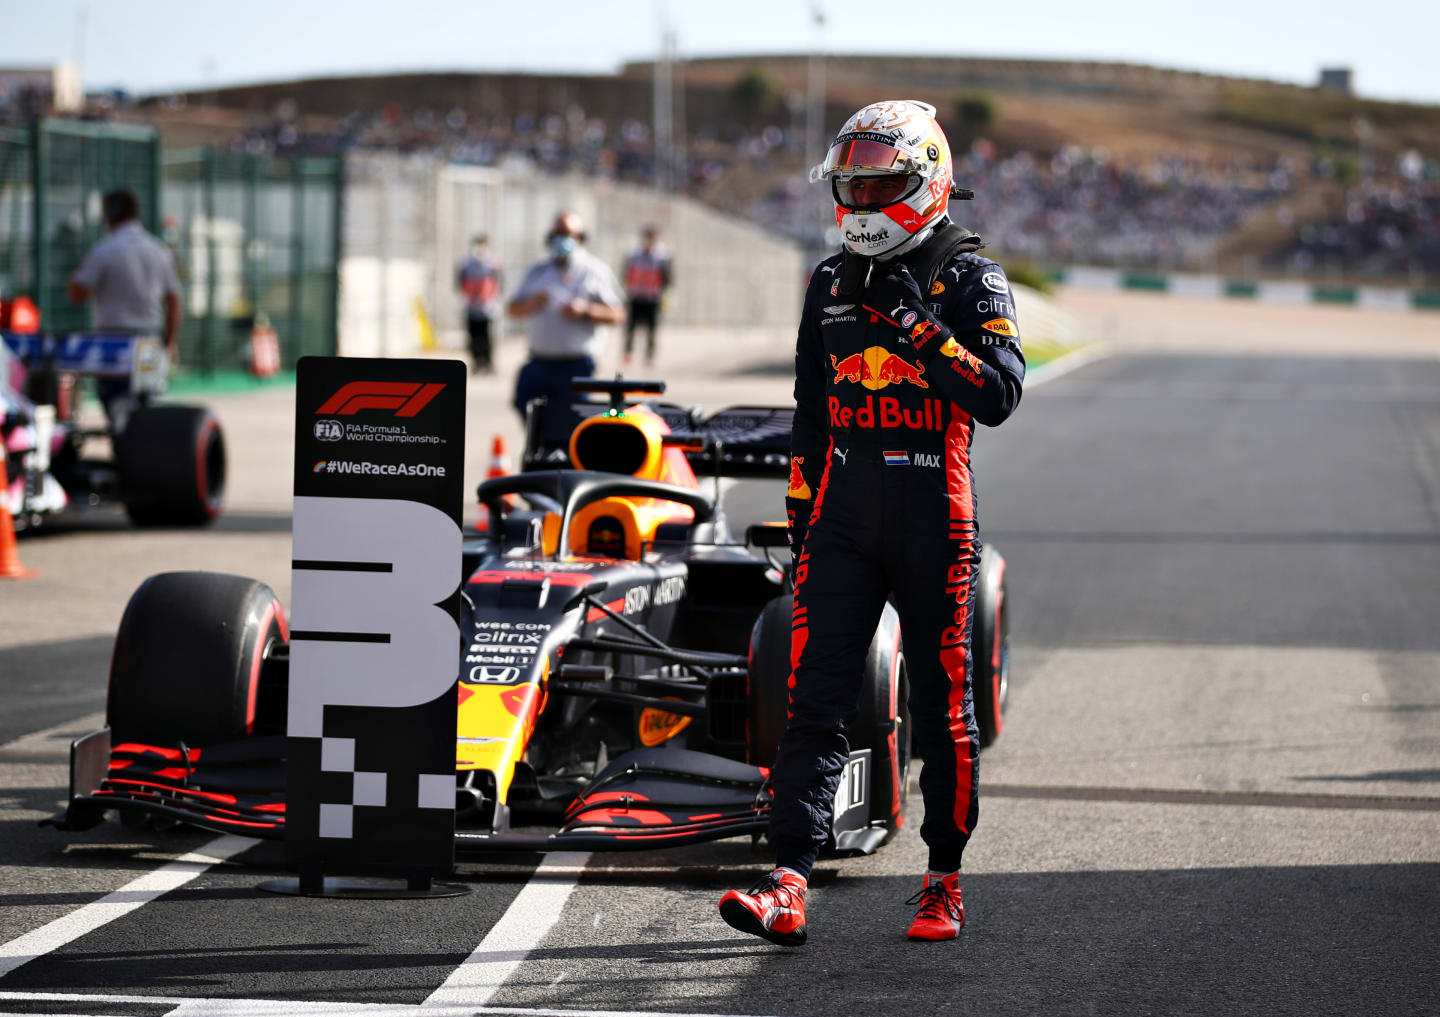 PORTIMAO, PORTUGAL - OCTOBER 24: Third place qualifier Max Verstappen of Netherlands and Red Bull